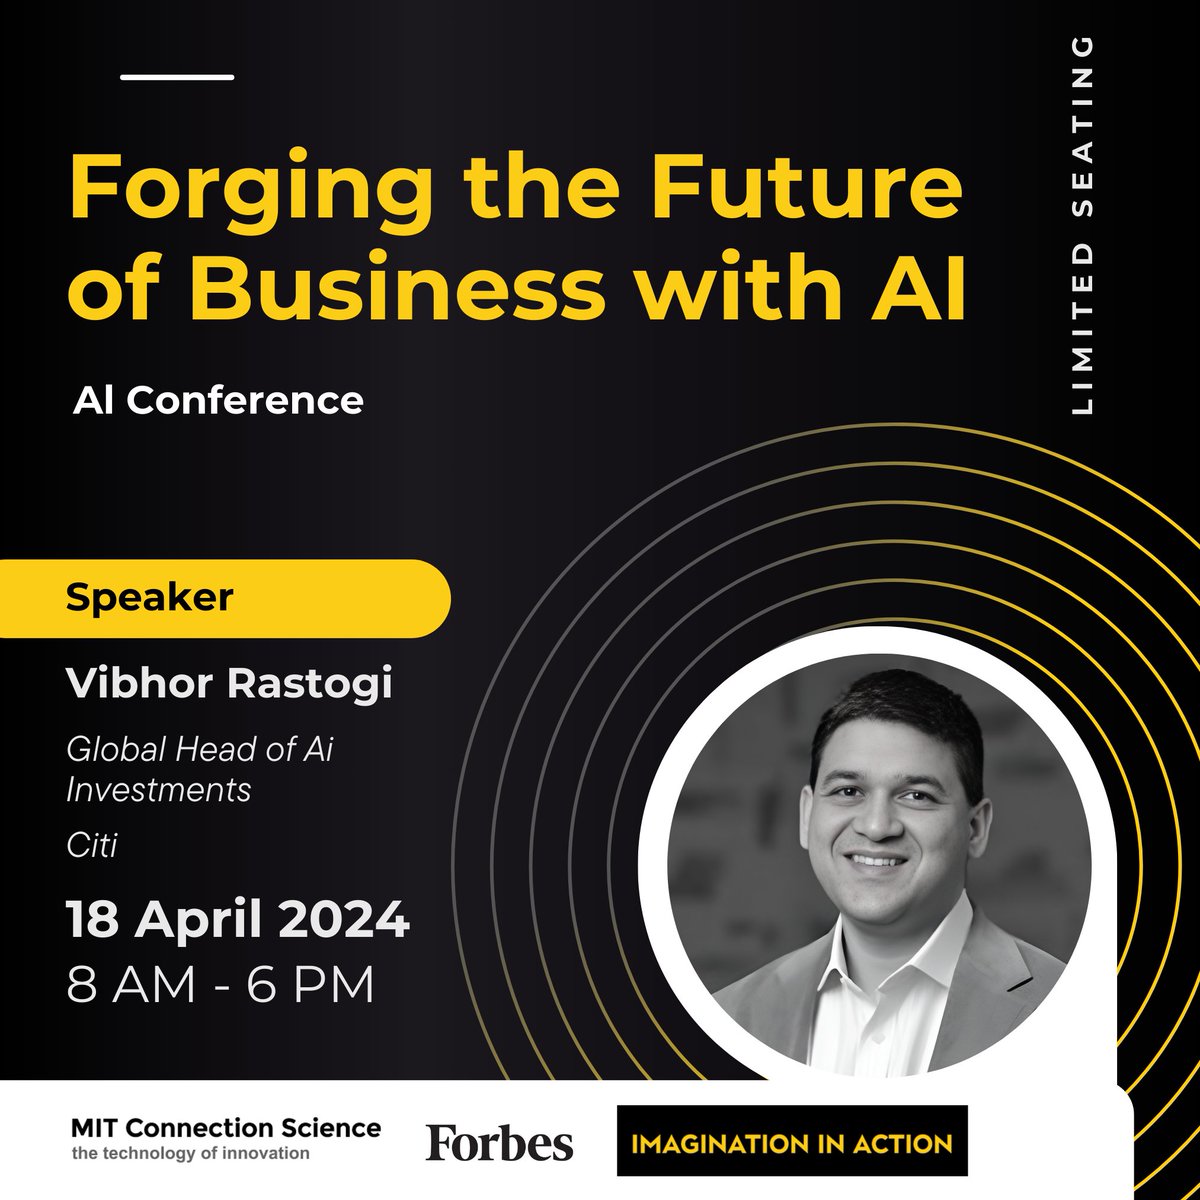 Highlighting Vibhor Rastogi, Global Head of AI Investments at Citi, as a distinguished speaker at the Imagination in Action Summit at MIT! Anticipate insightful discussions on the future of AI investments and financial services. #MITforge2024